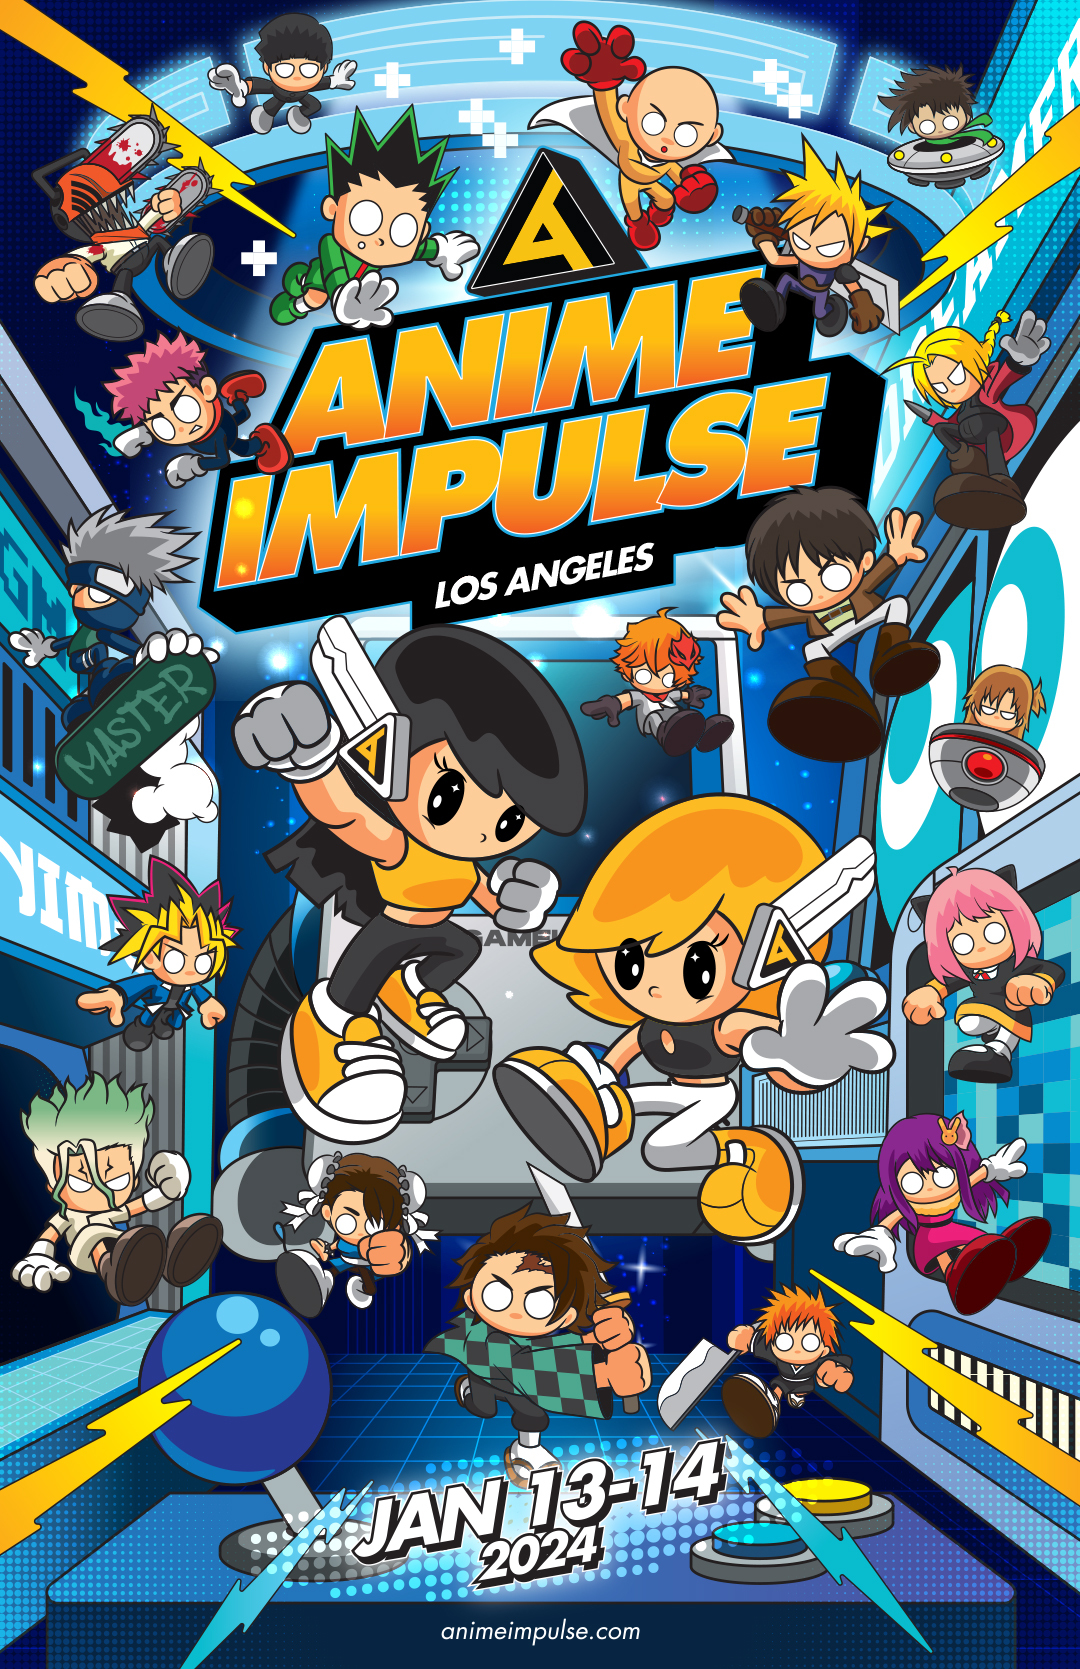 ANIME Impulse Ends 2023 in OC! - The Game of Nerds